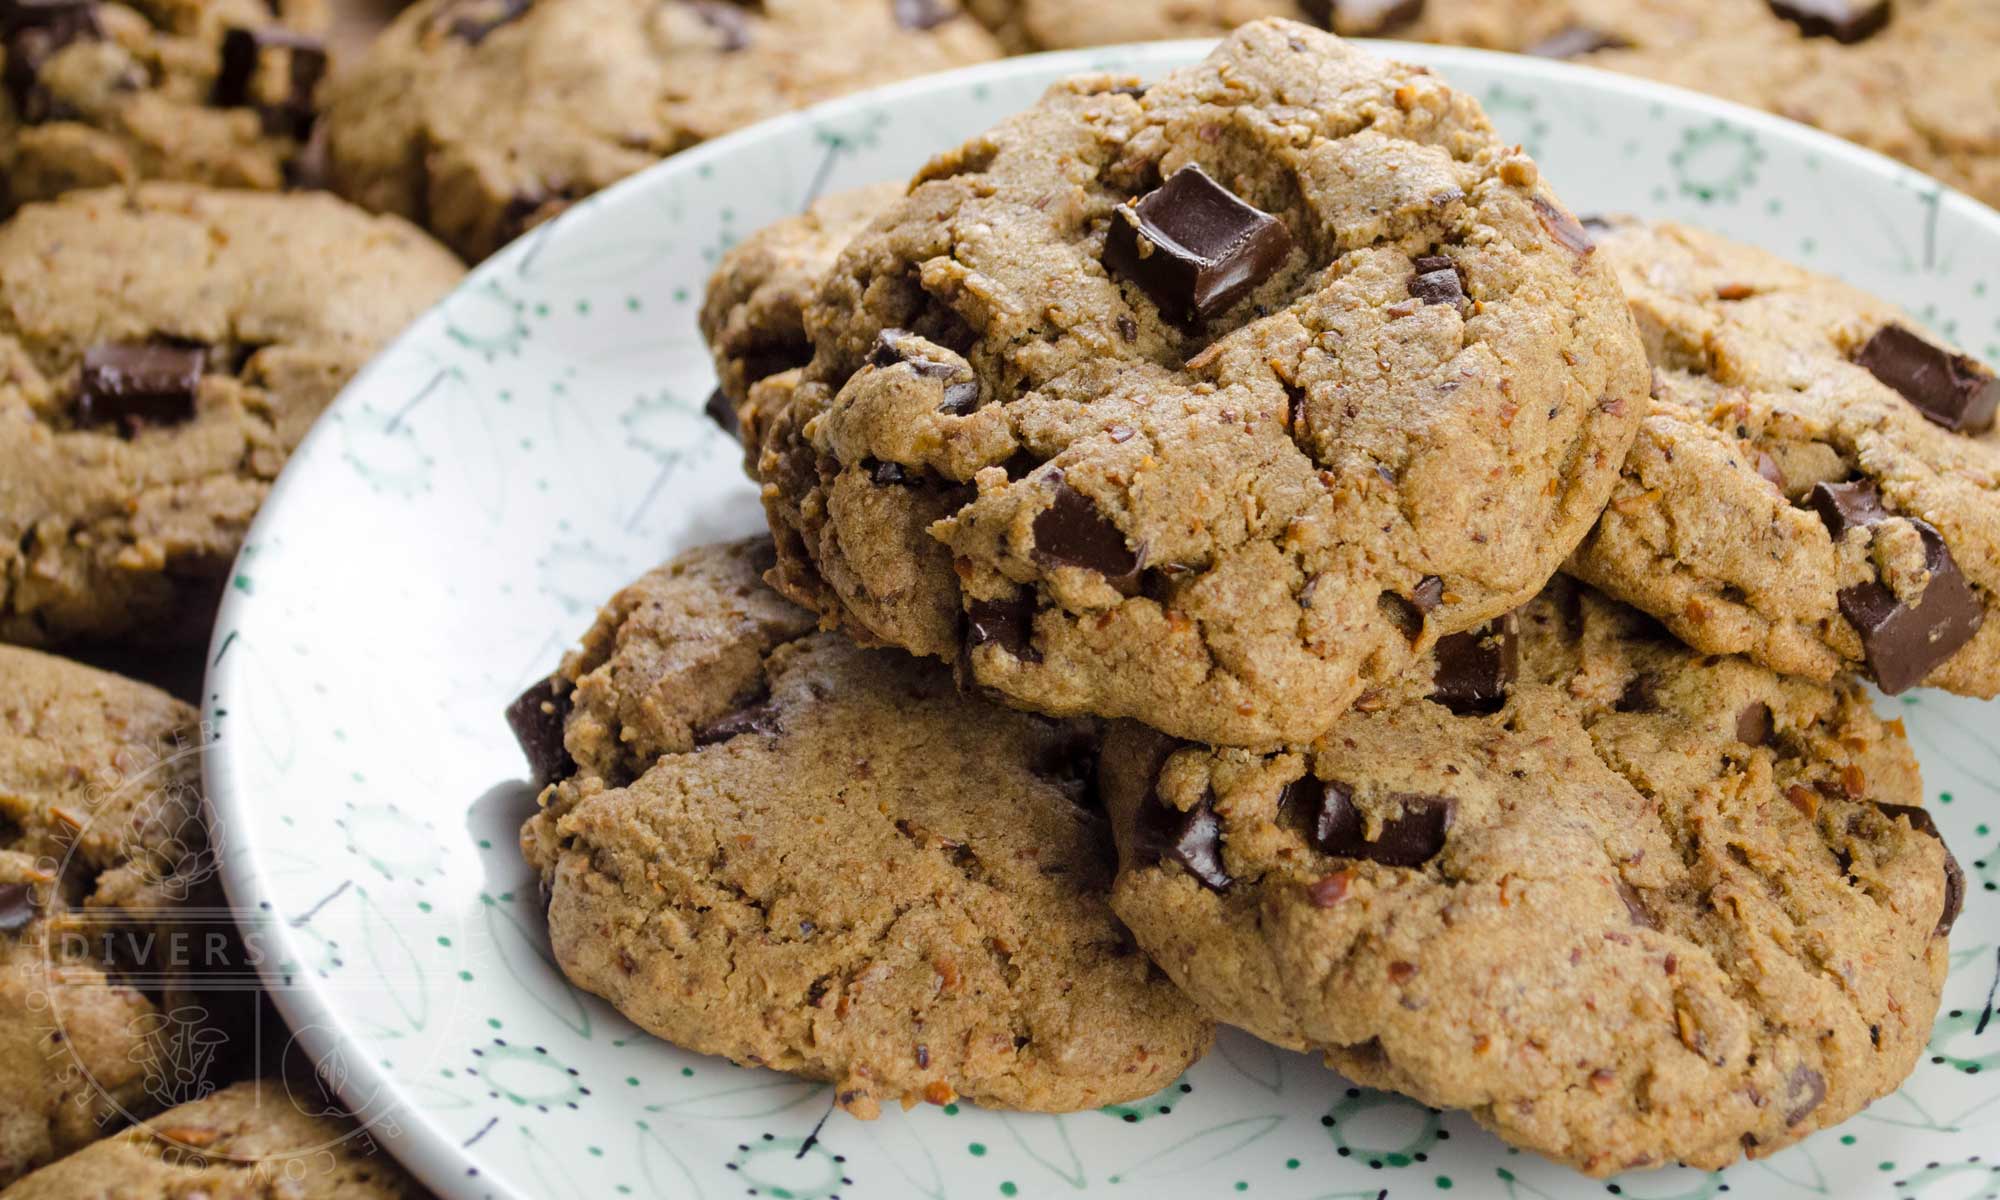 Featured image for “Chocolate Chip Cookies with Brown Butter & Toasted Oats”